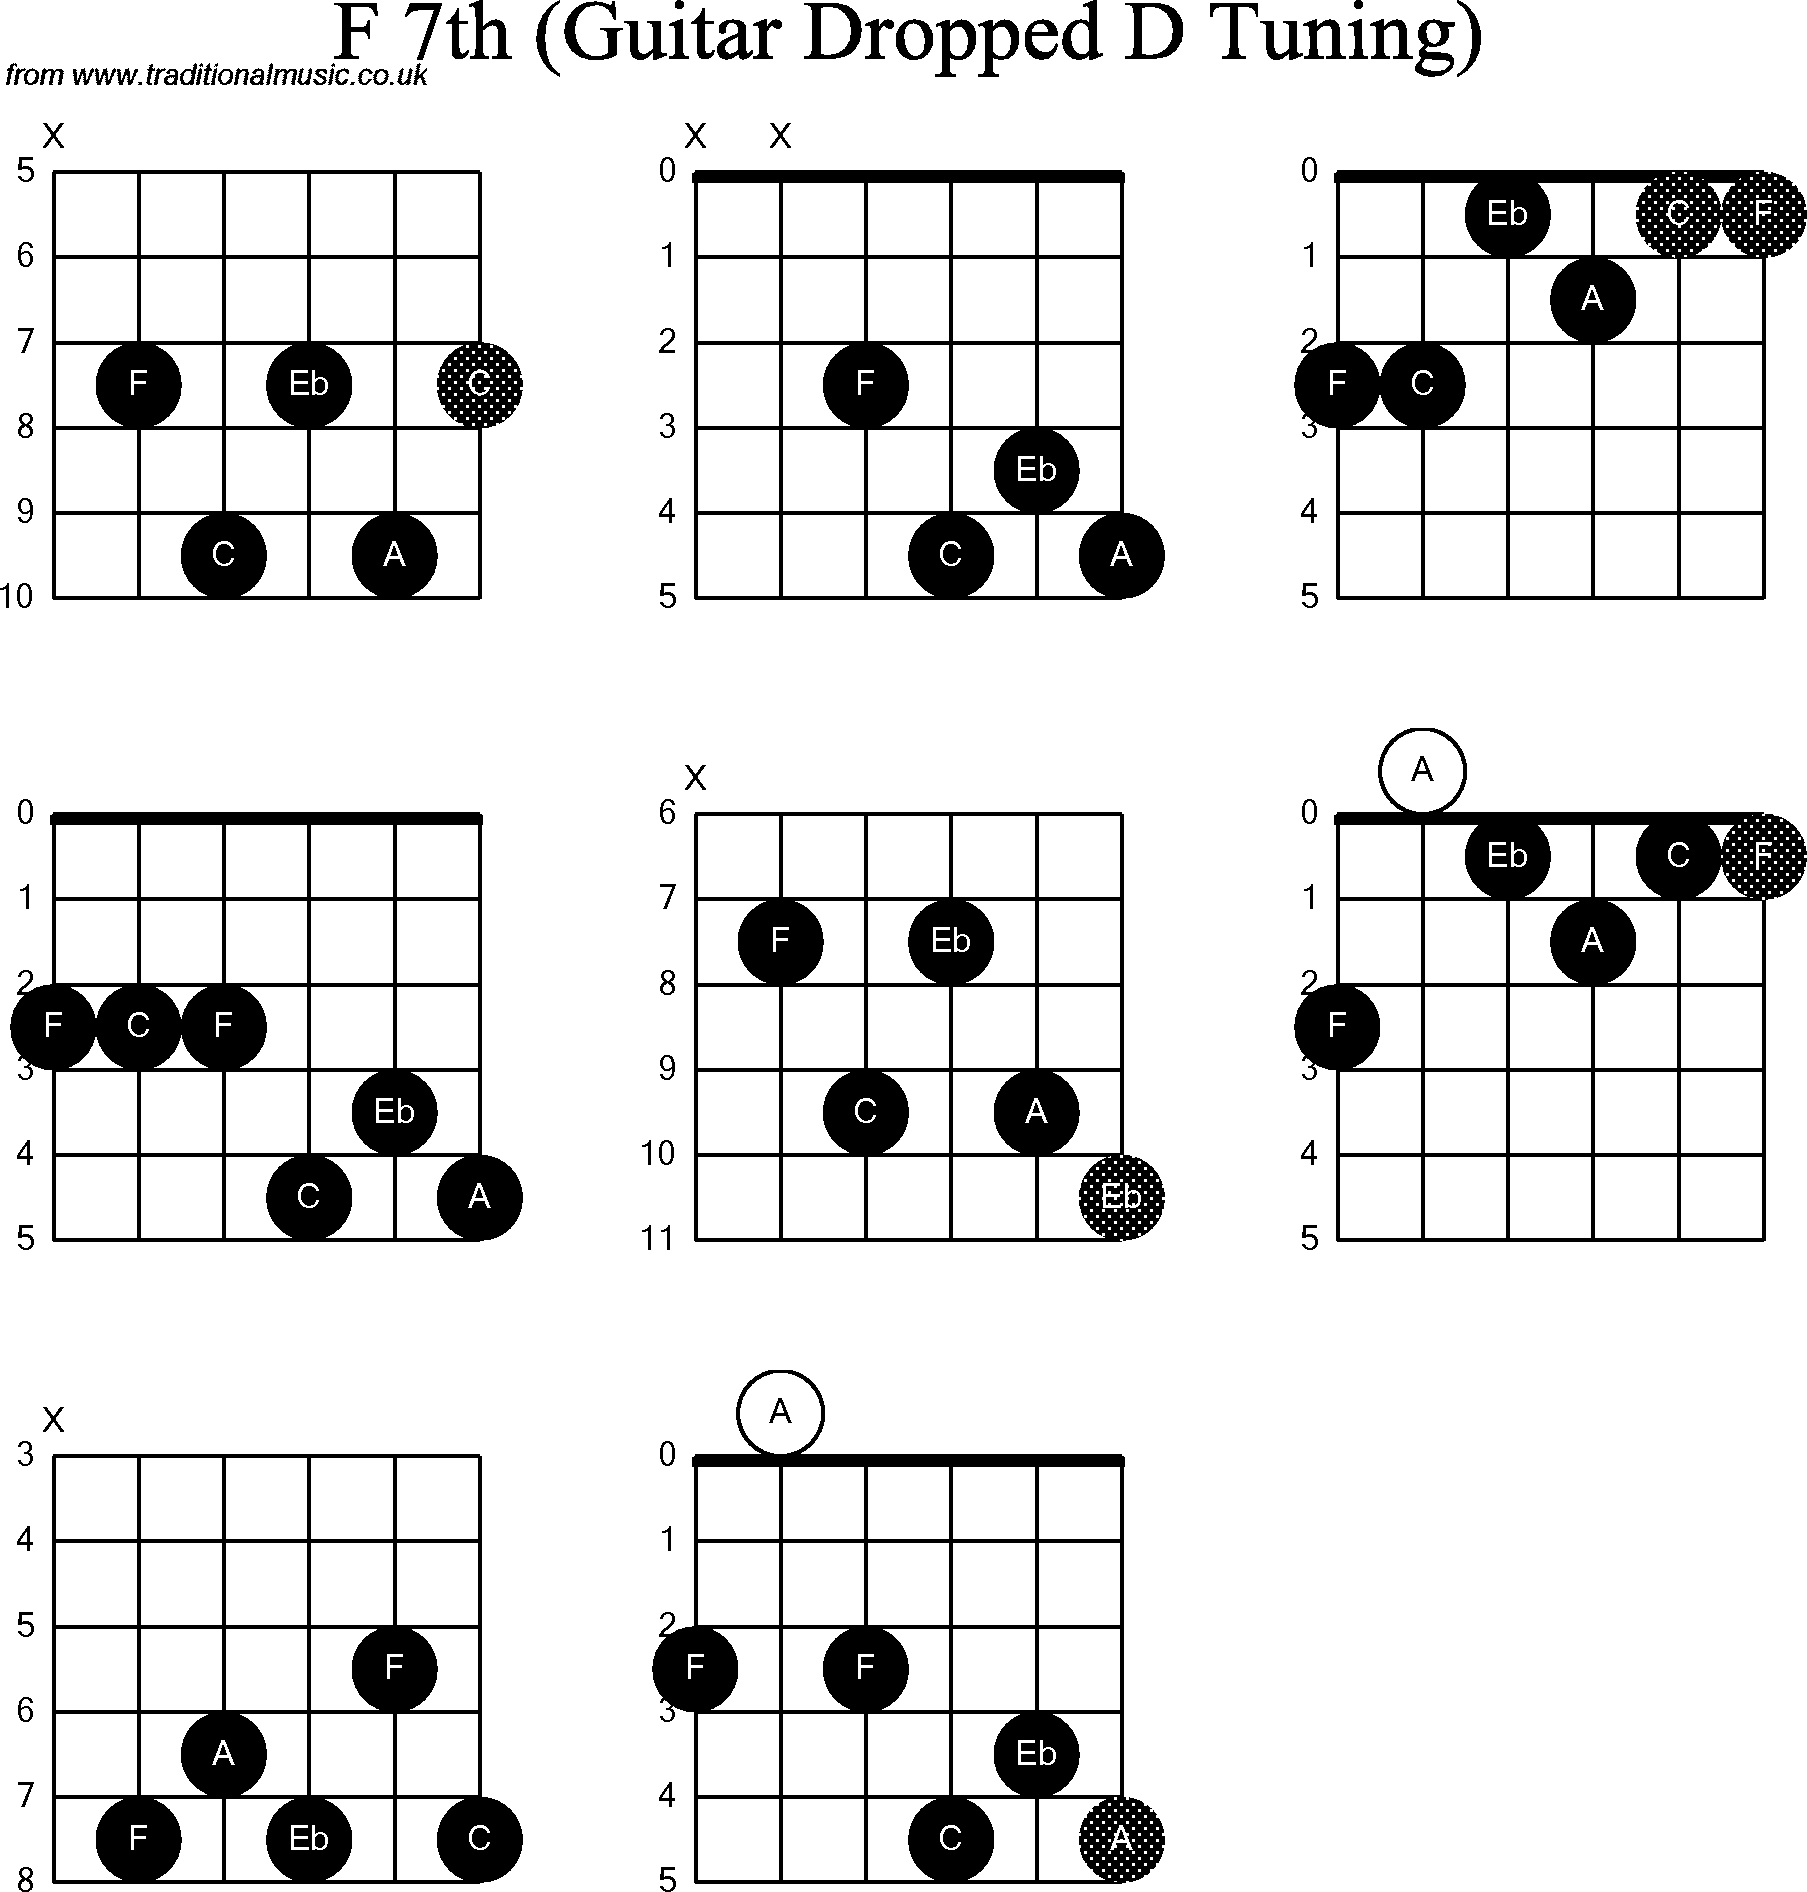 Chord diagrams for dropped D Guitar(DADGBE), F7th